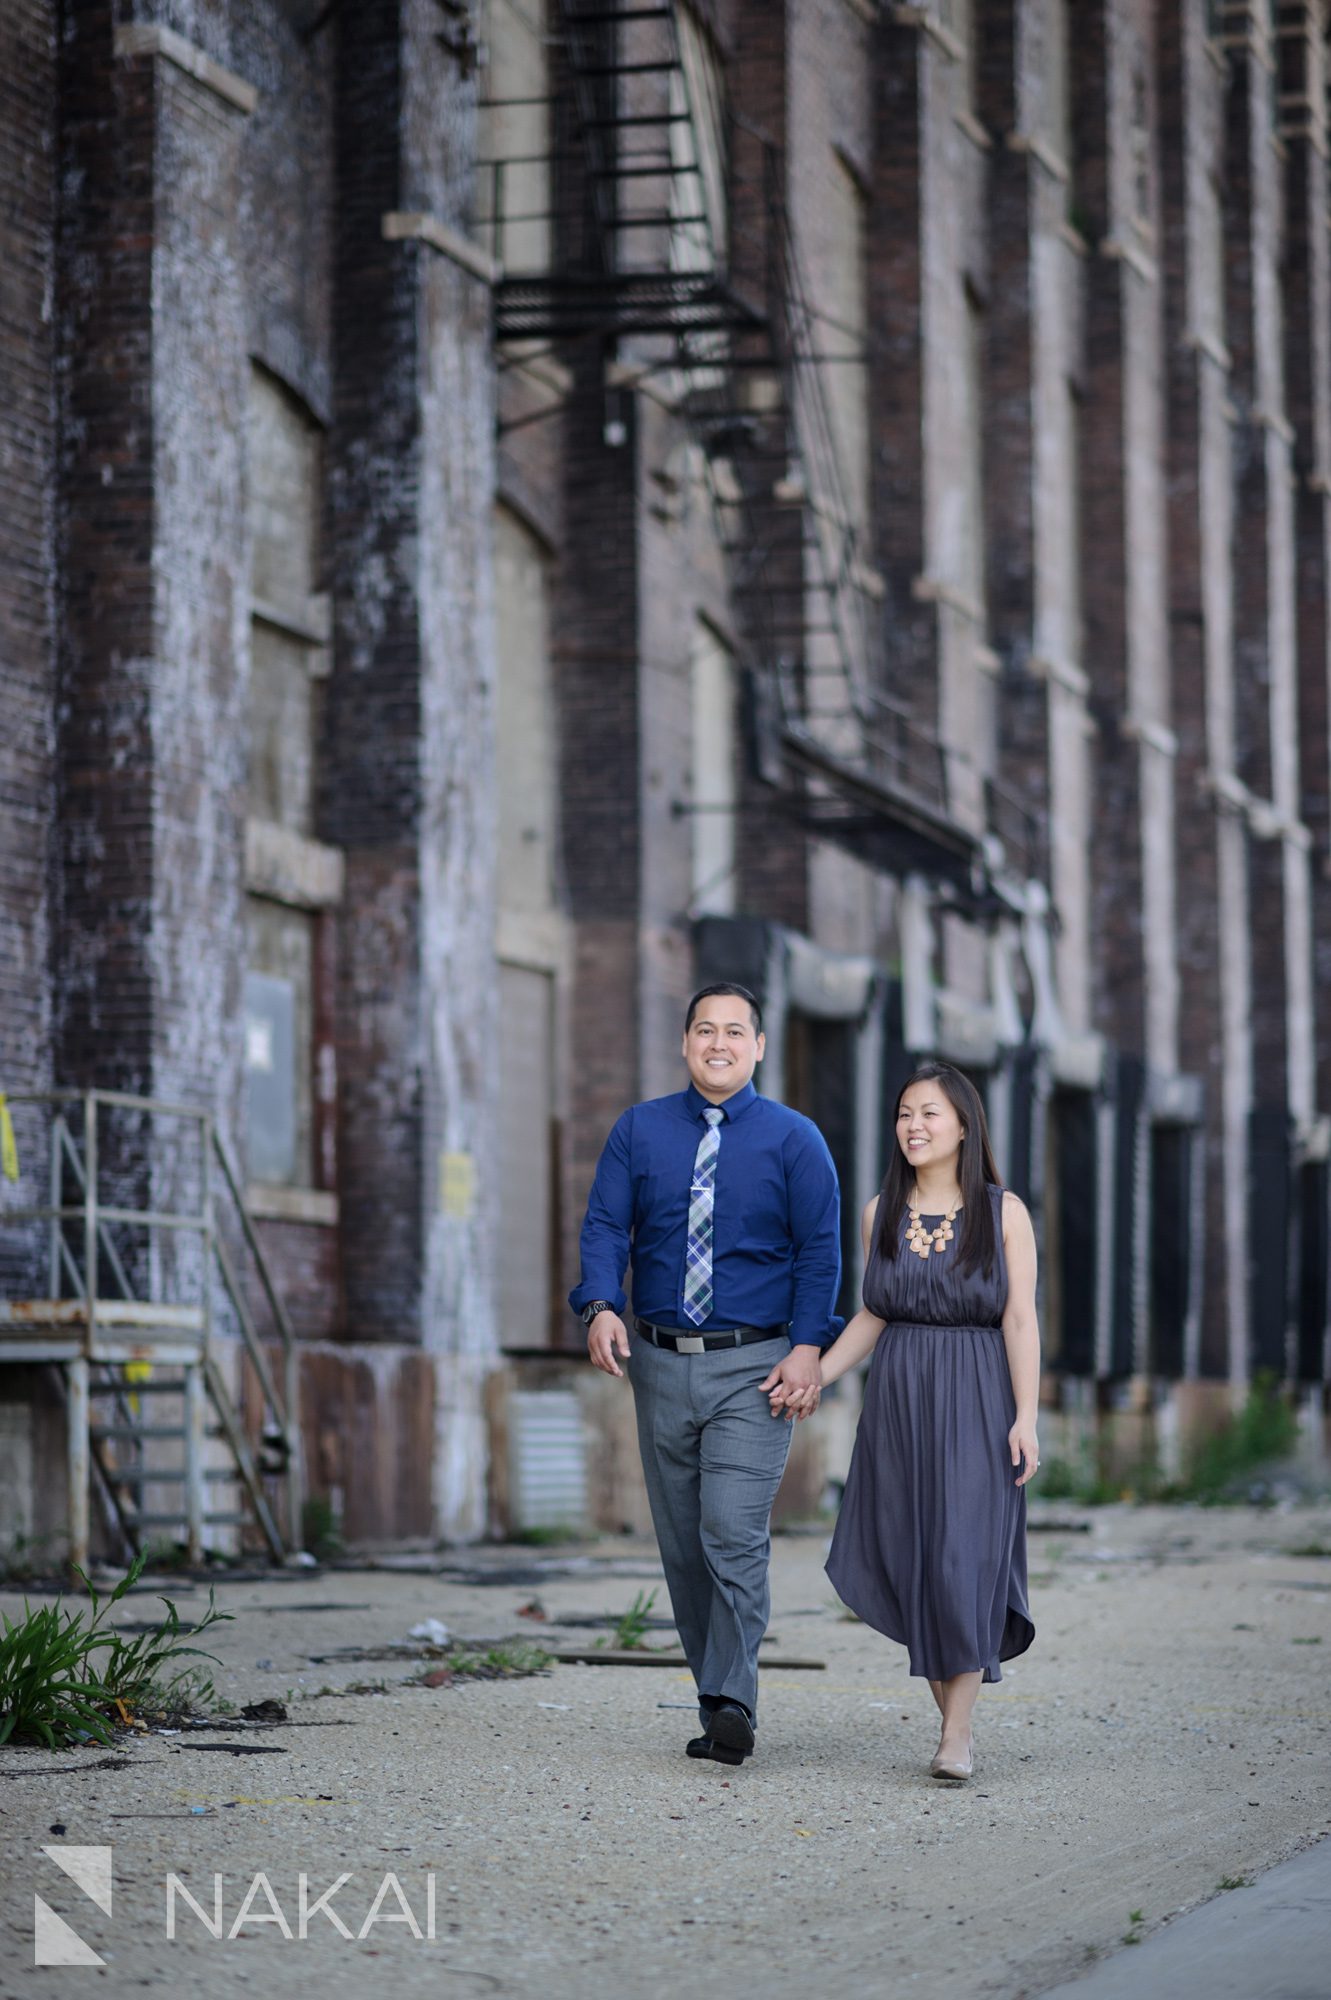 creative chicago engagement photography industrial urban